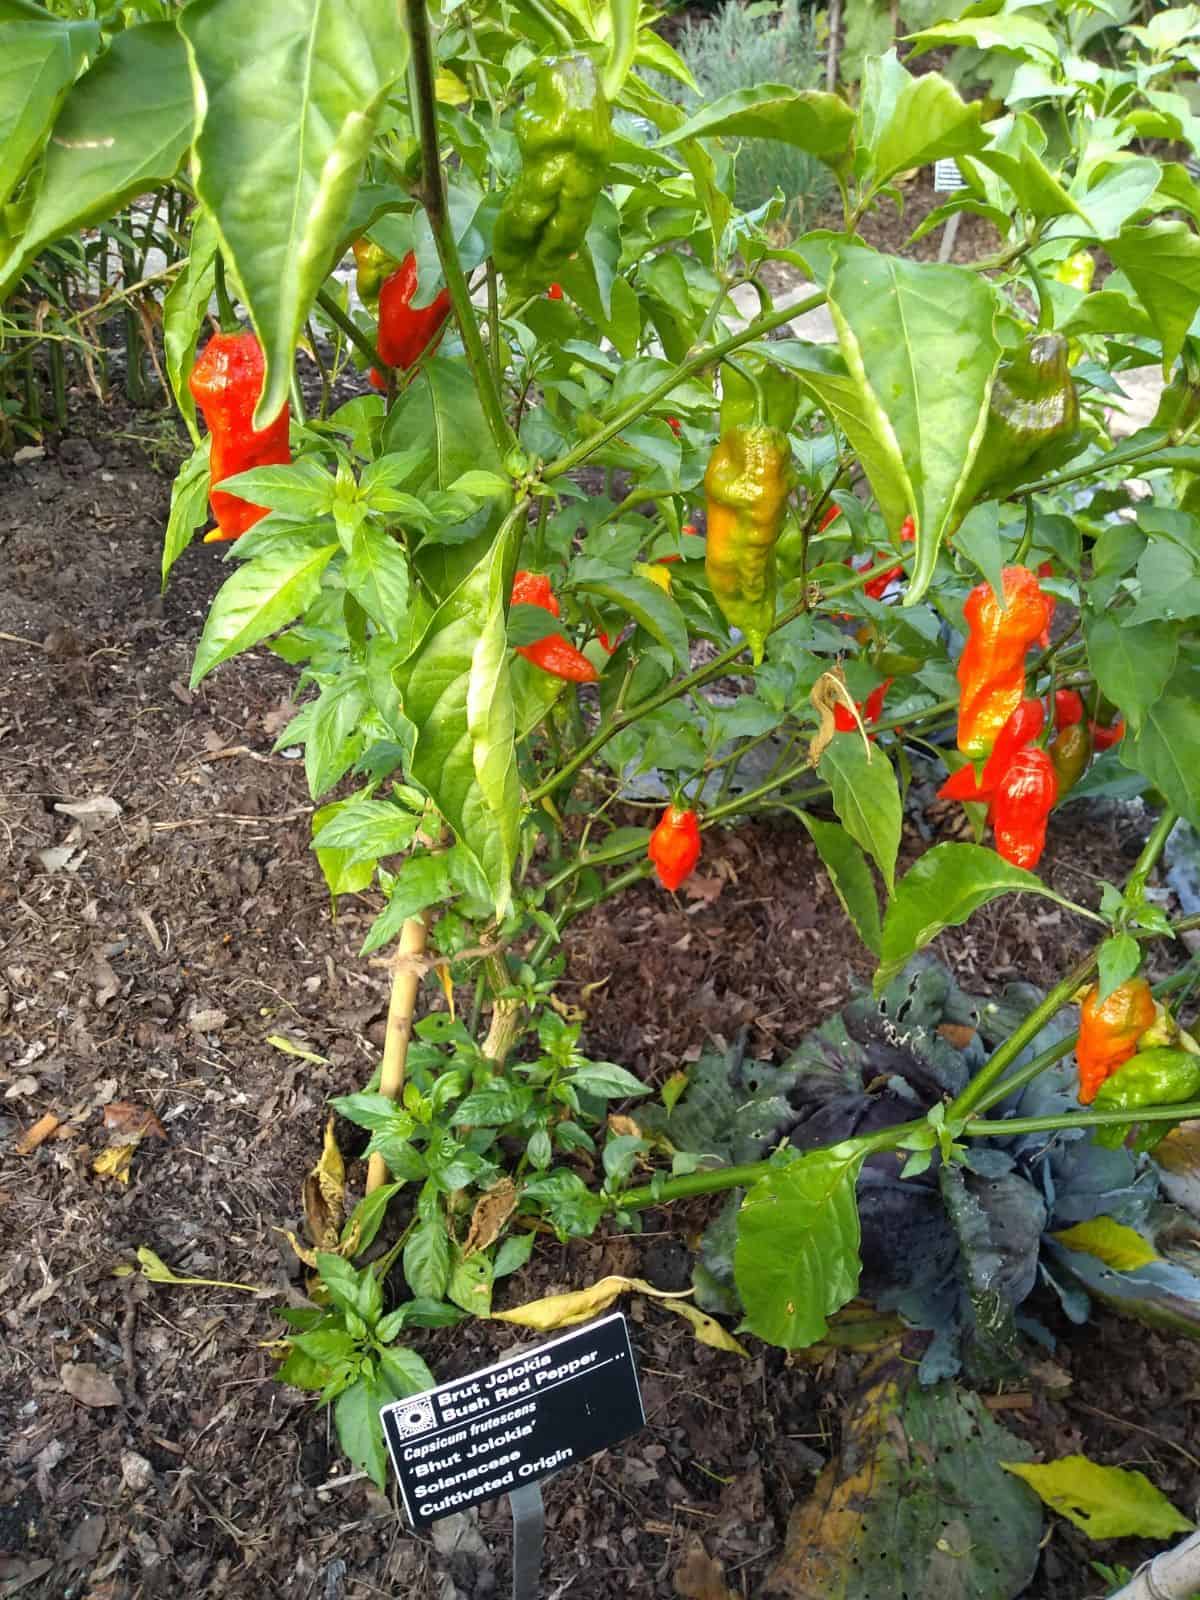 A Brut Jolokia or Ghost pepper plants growing outside. The peppers that are forming looked wrinkly but aren't shriveled. 